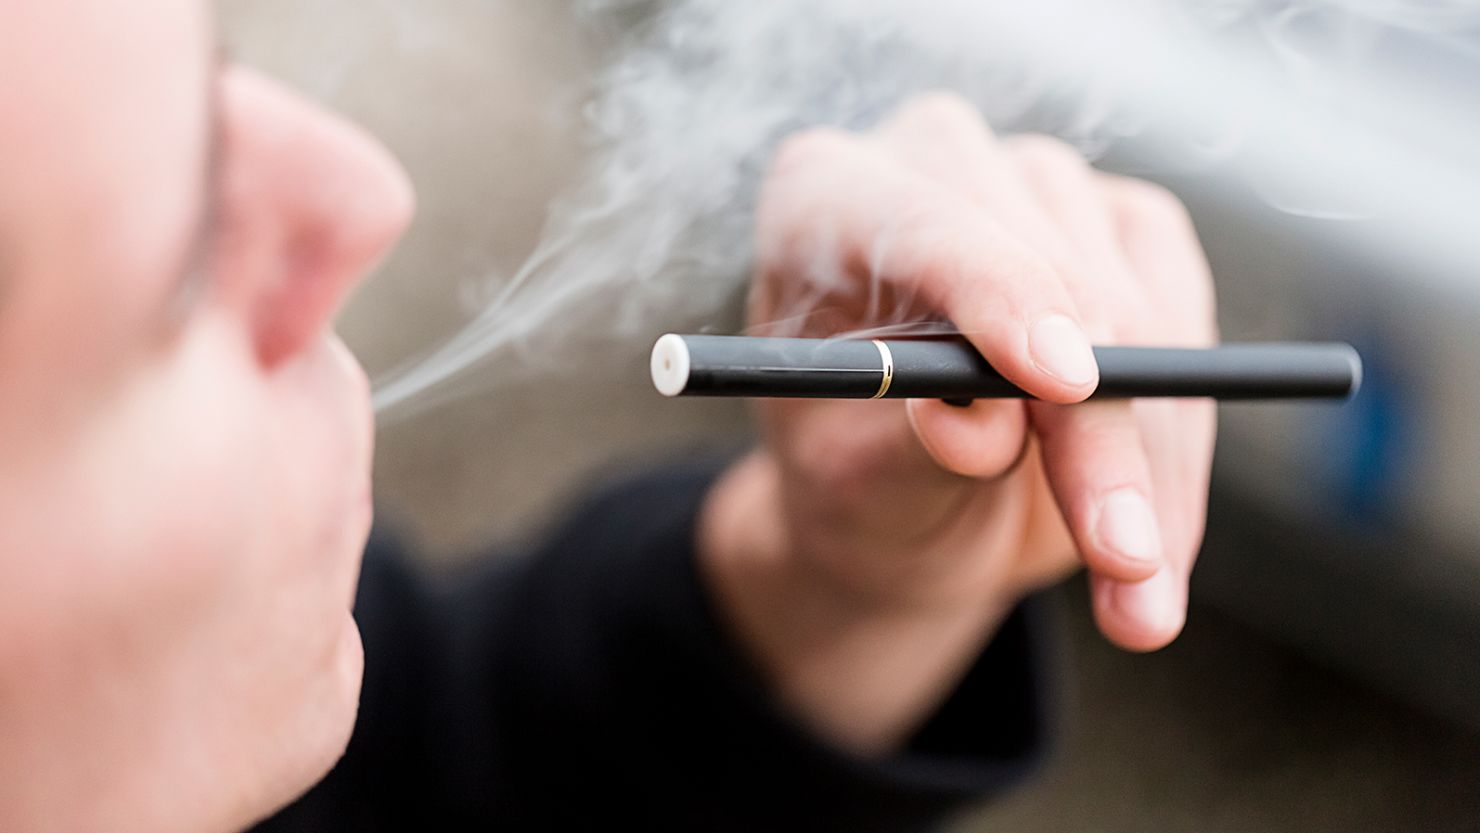 Teenage vaping has been linked to psychological issues, headaches, stomachaches and significant addictions to nicotine. 